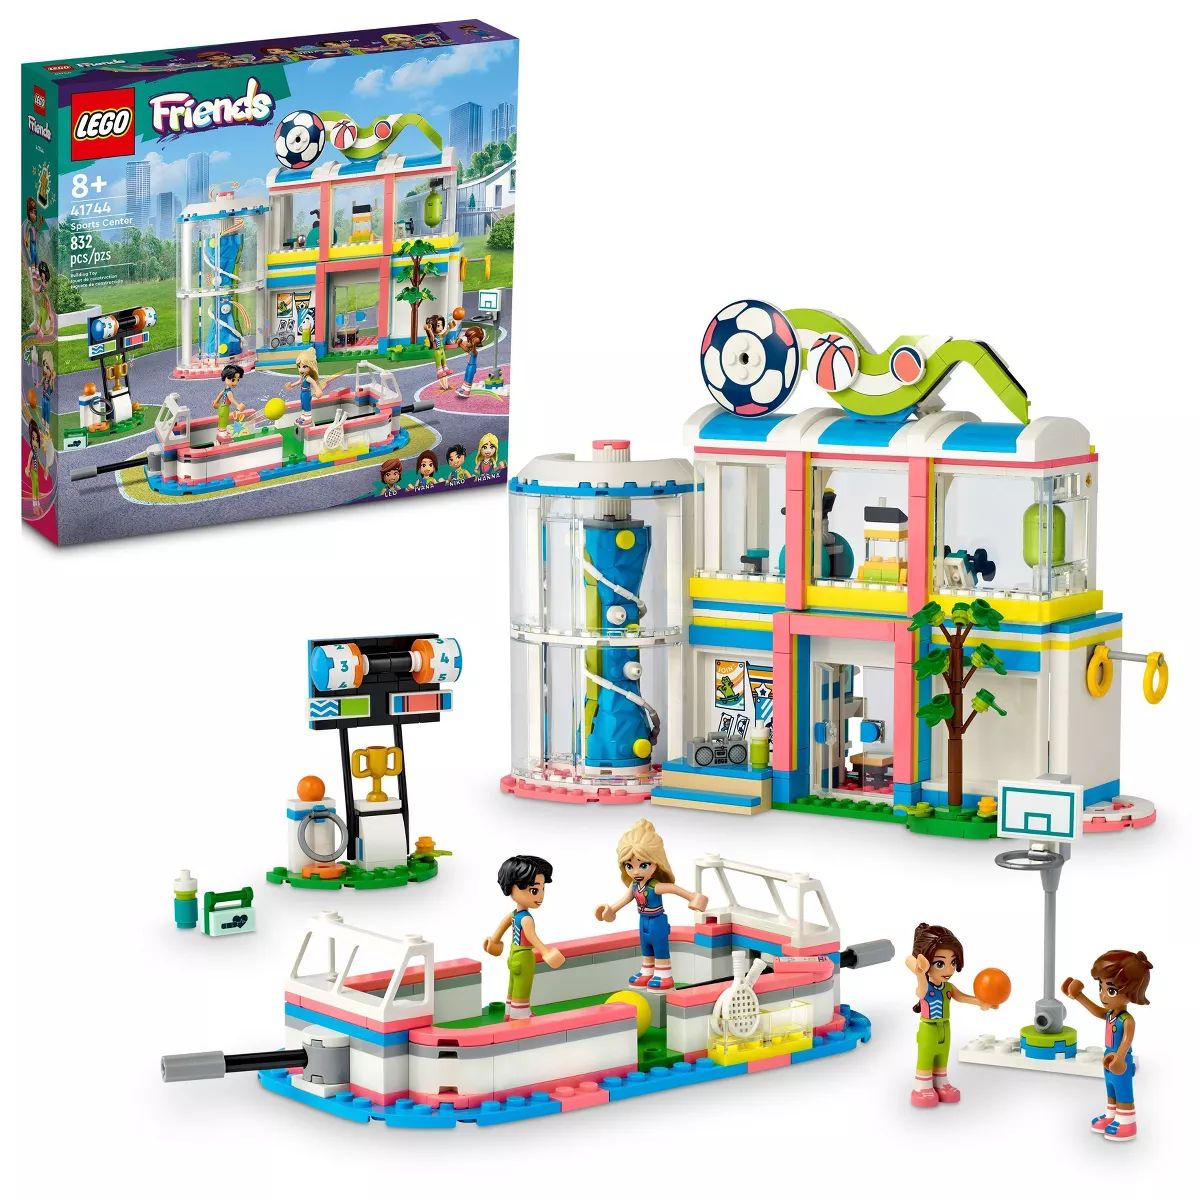 LEGO Friends Sports Center Games Building Toy 41744 | Target